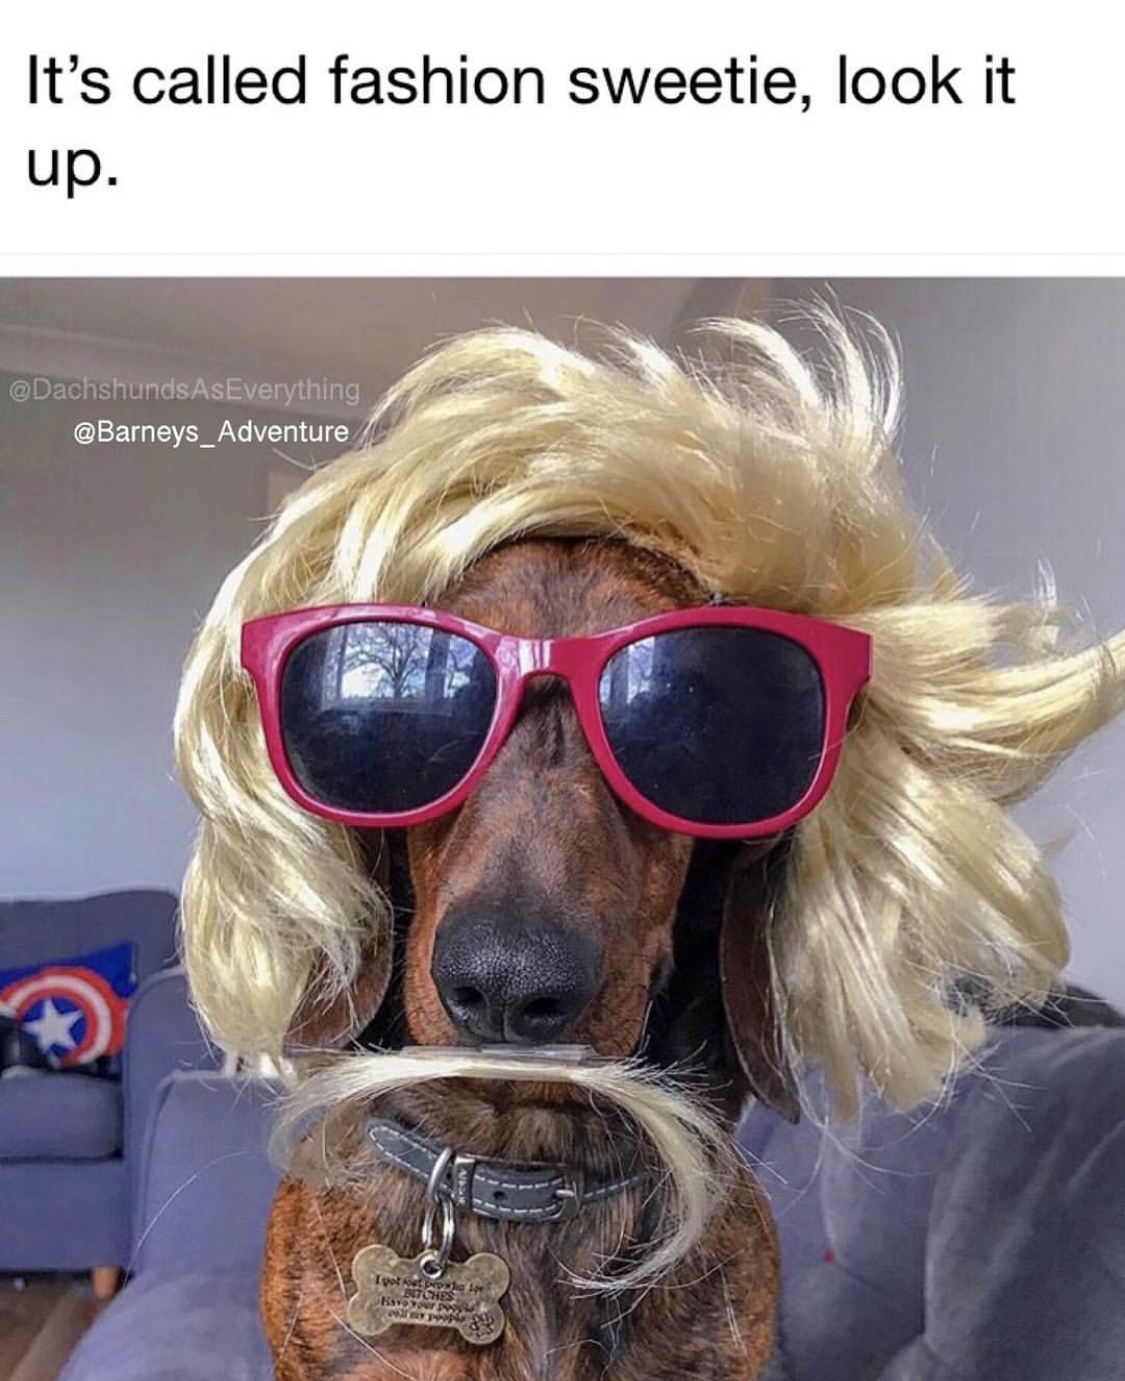 A Dachshund wearing a blonde wig and sunglasses while sitting on the couch photo with caption - It's called fashion sweetie, look it up.